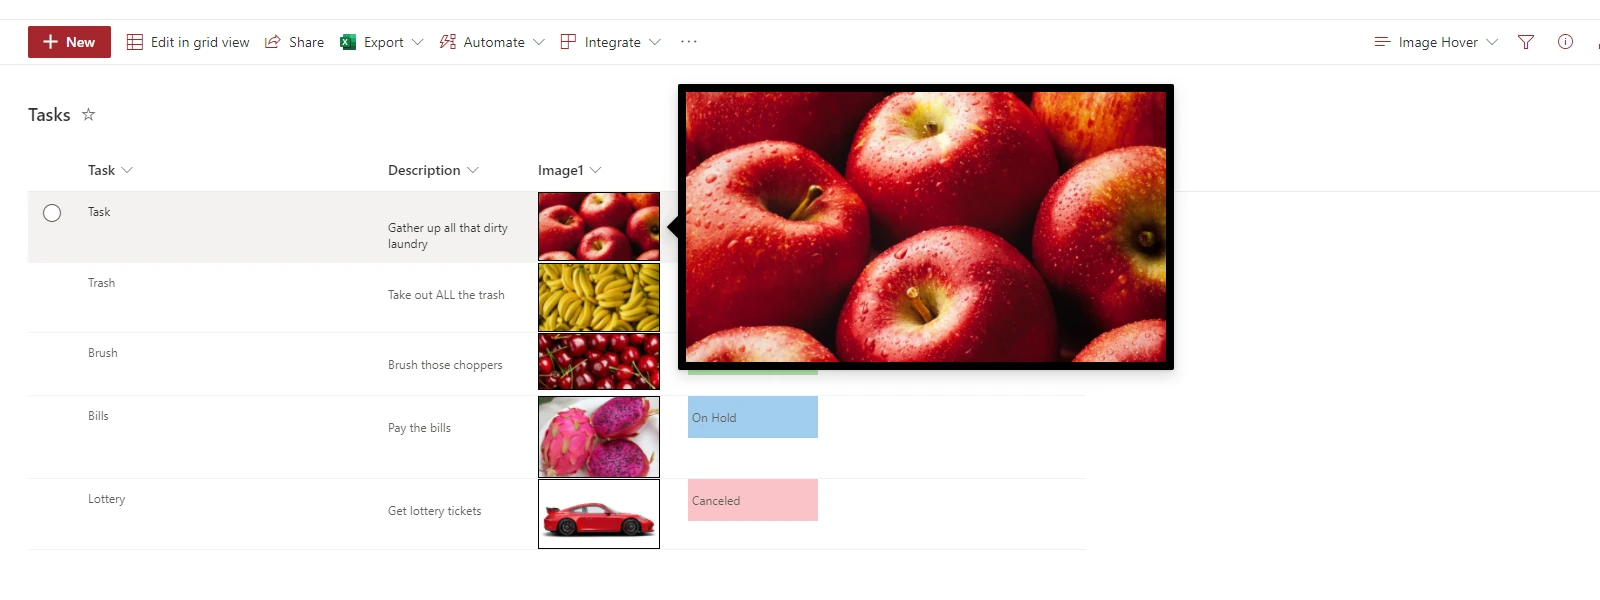 Image Hover Boxes